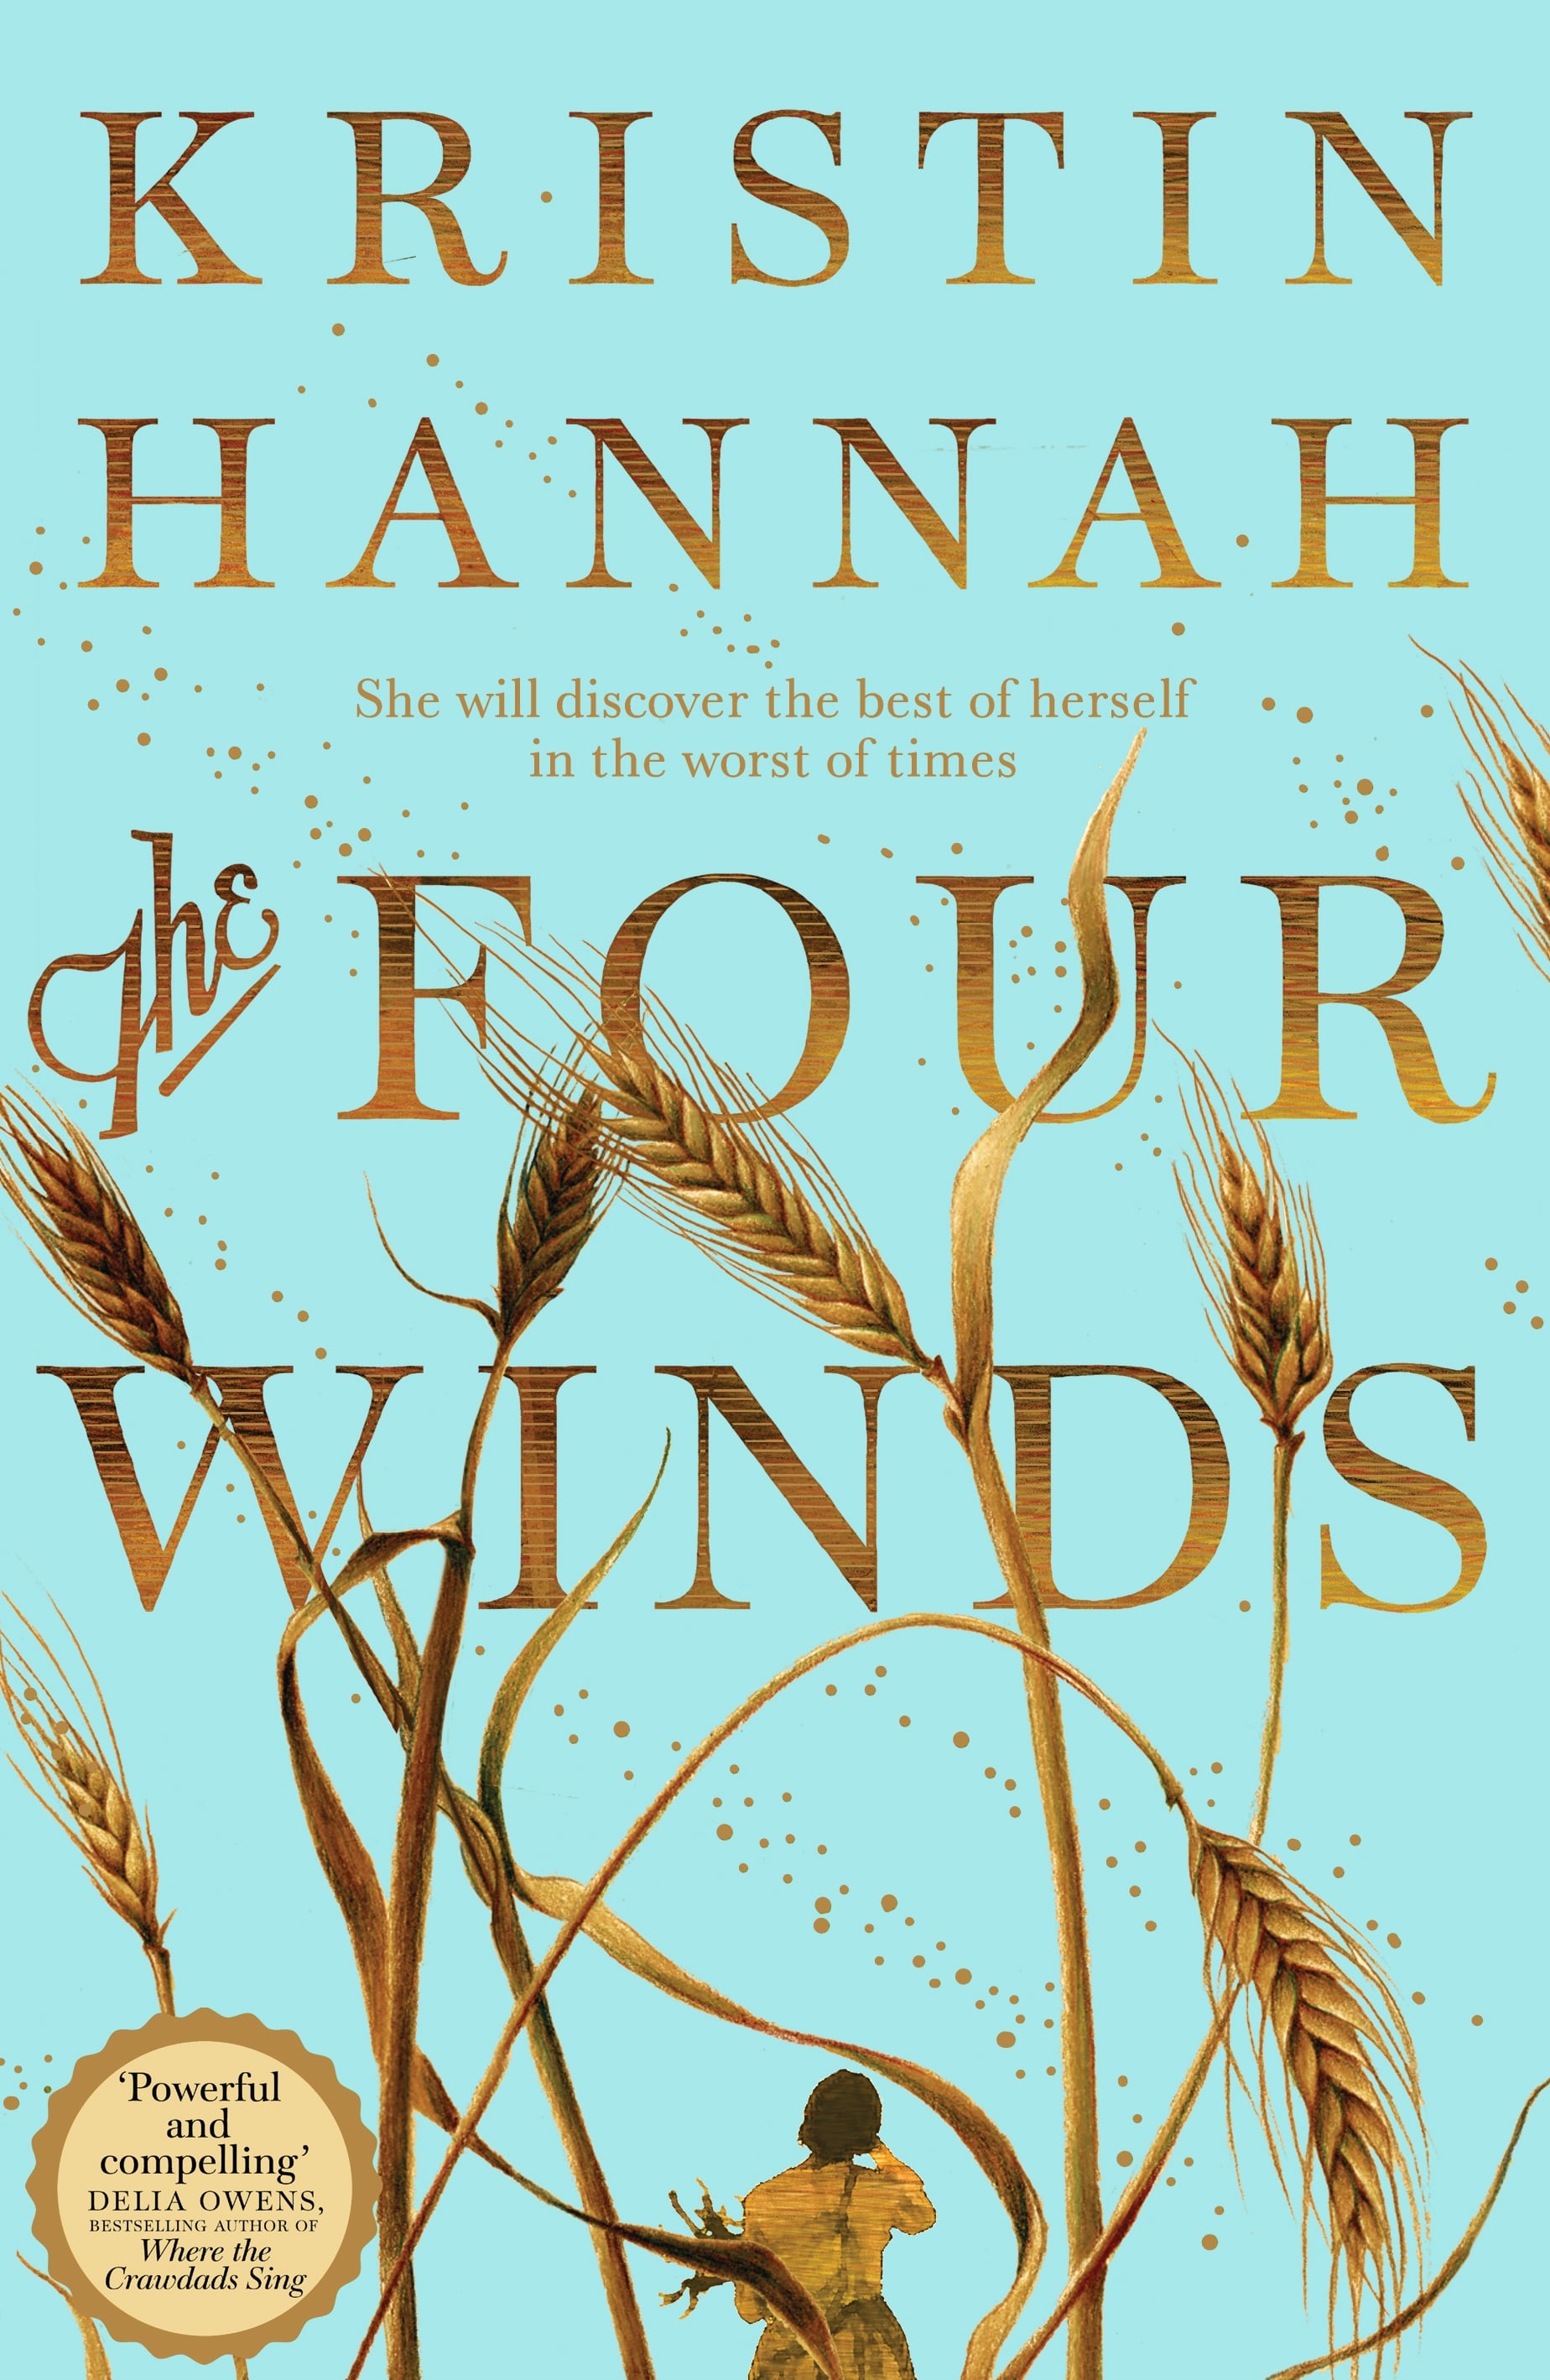 book review for the four winds by kristin hannah